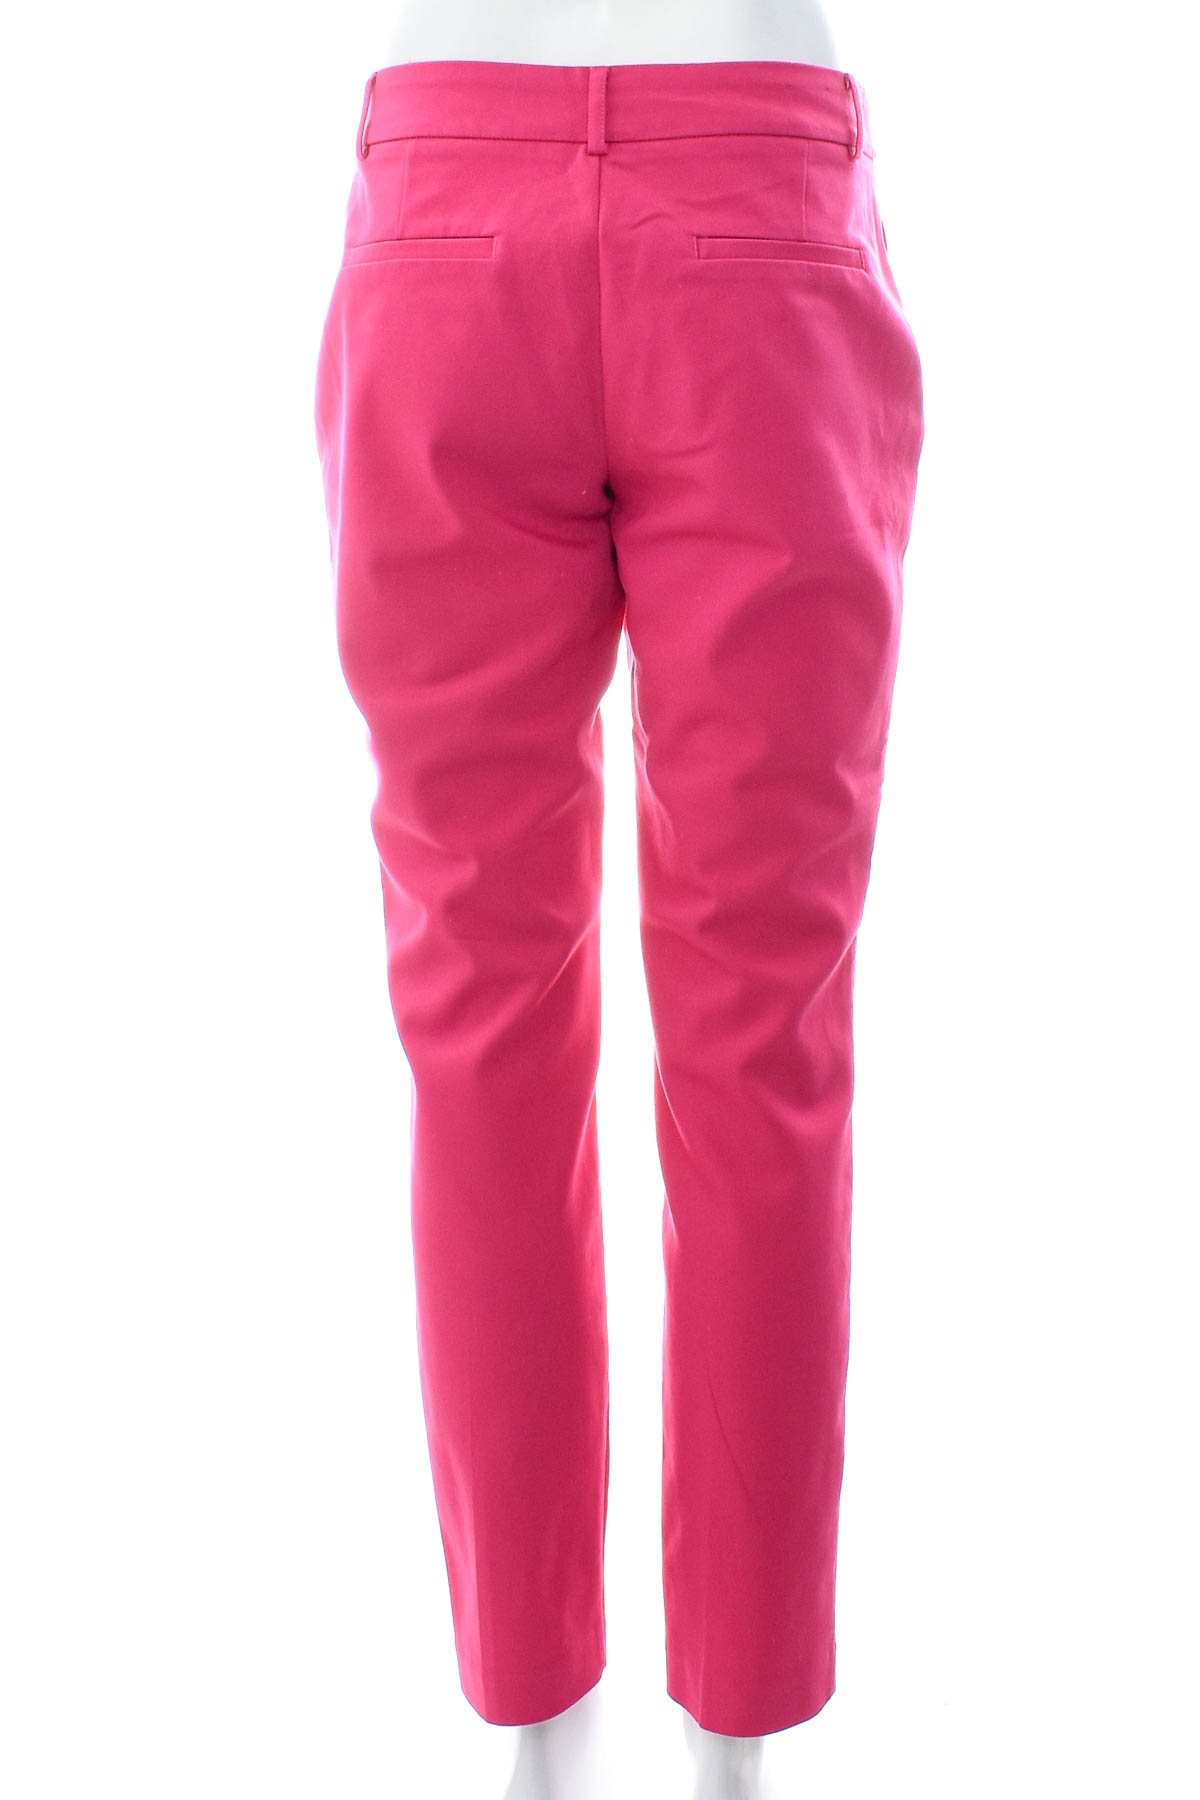 Women's trousers - RESERVED - 1